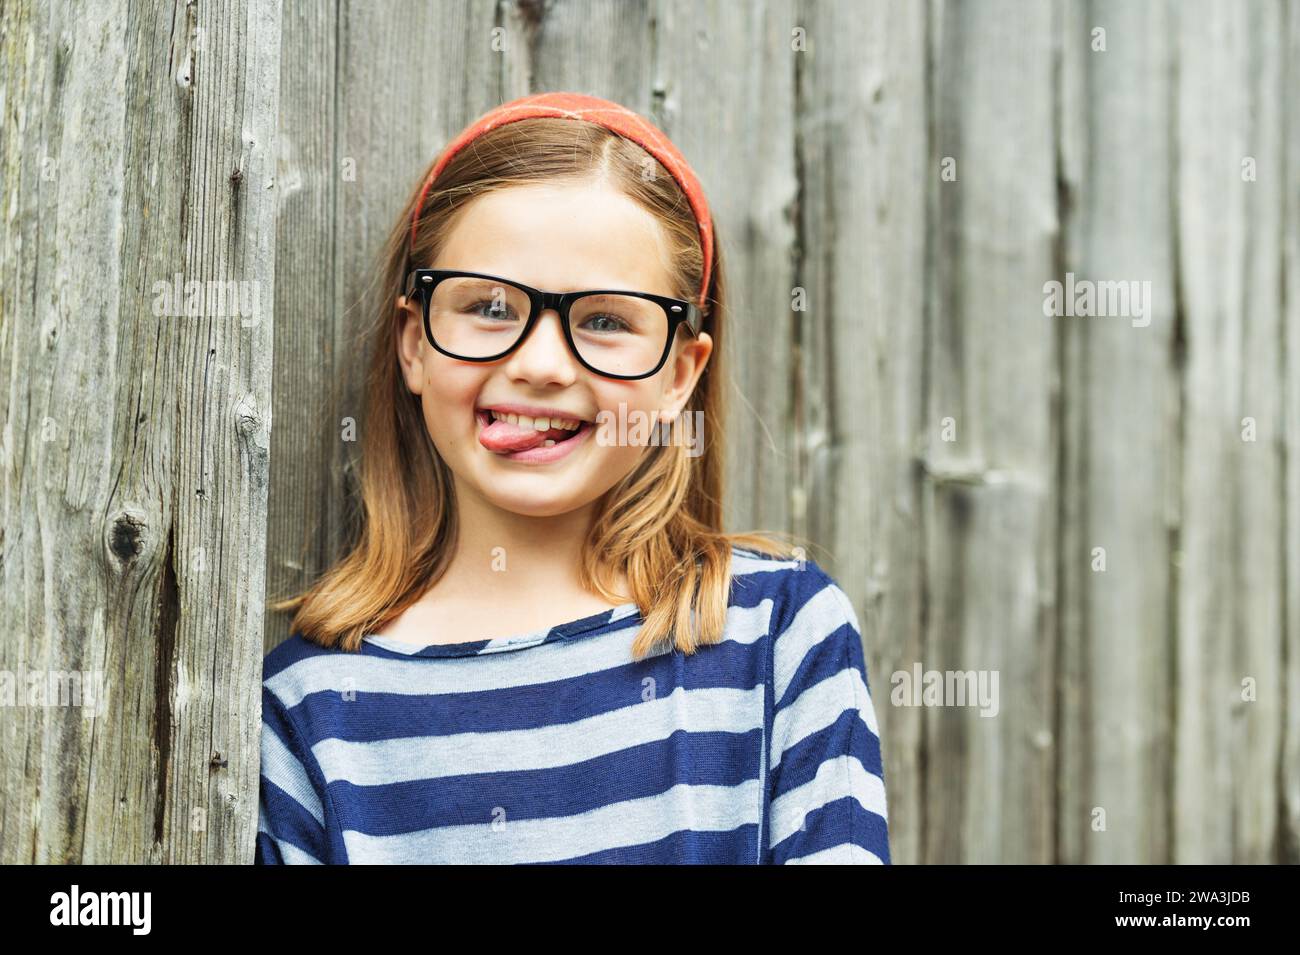 Outdoor portrait of a cute little 9 year old girl wearing eyeglasses Stock Photo